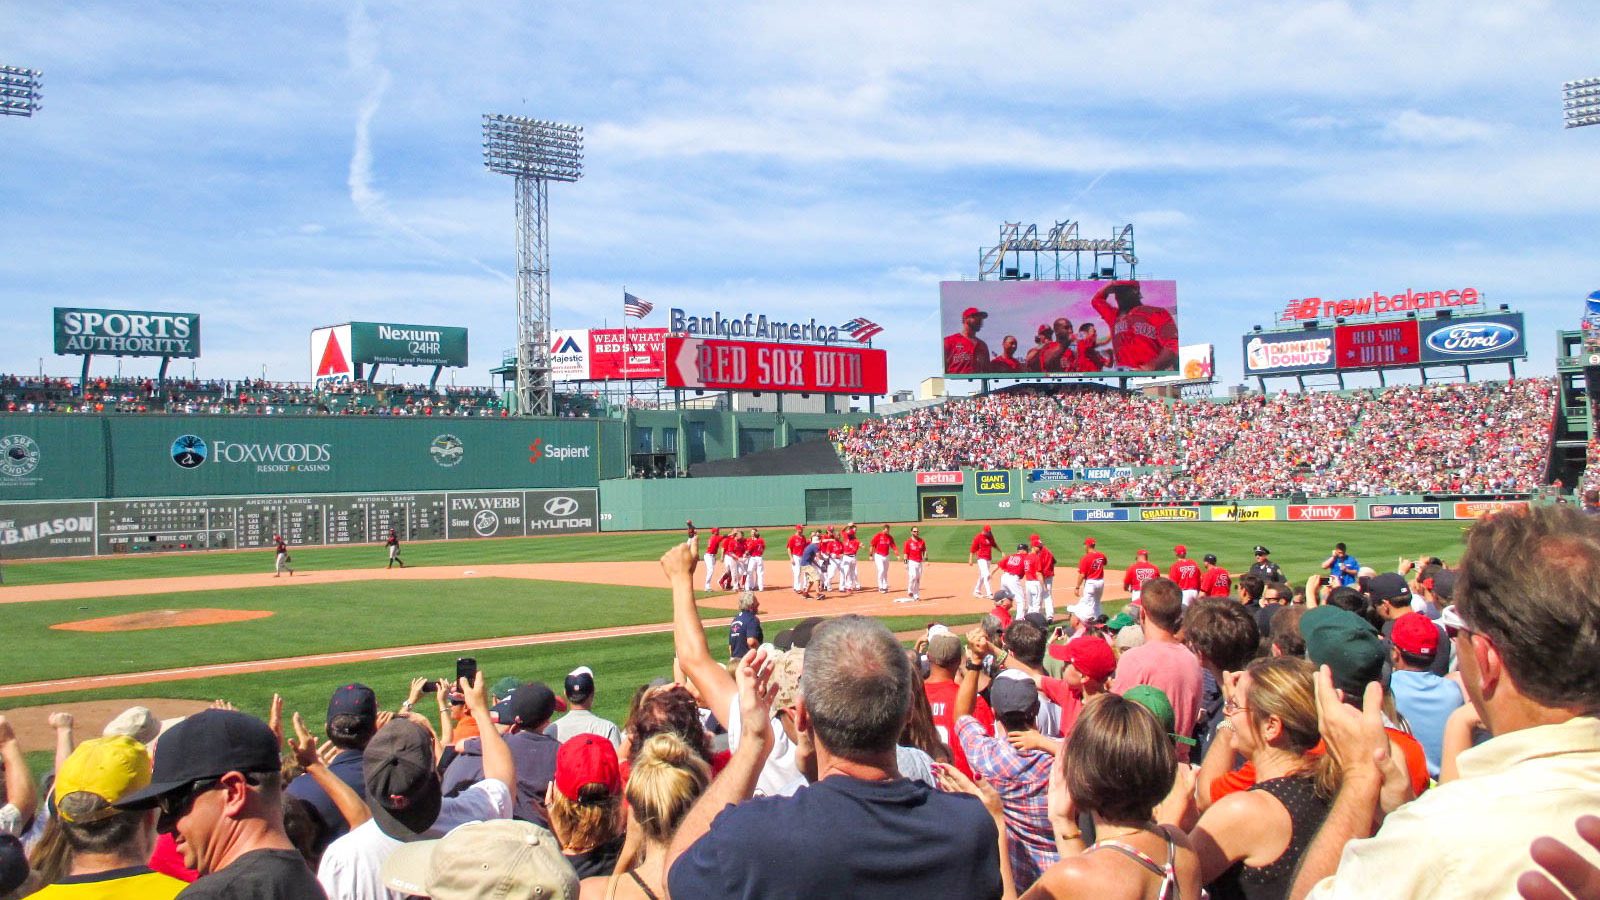 How to save money when visiting Boston: 13+ money-saving tips for visiting Boston on a budget; save money on your trip to Boston with these pro tips from a local